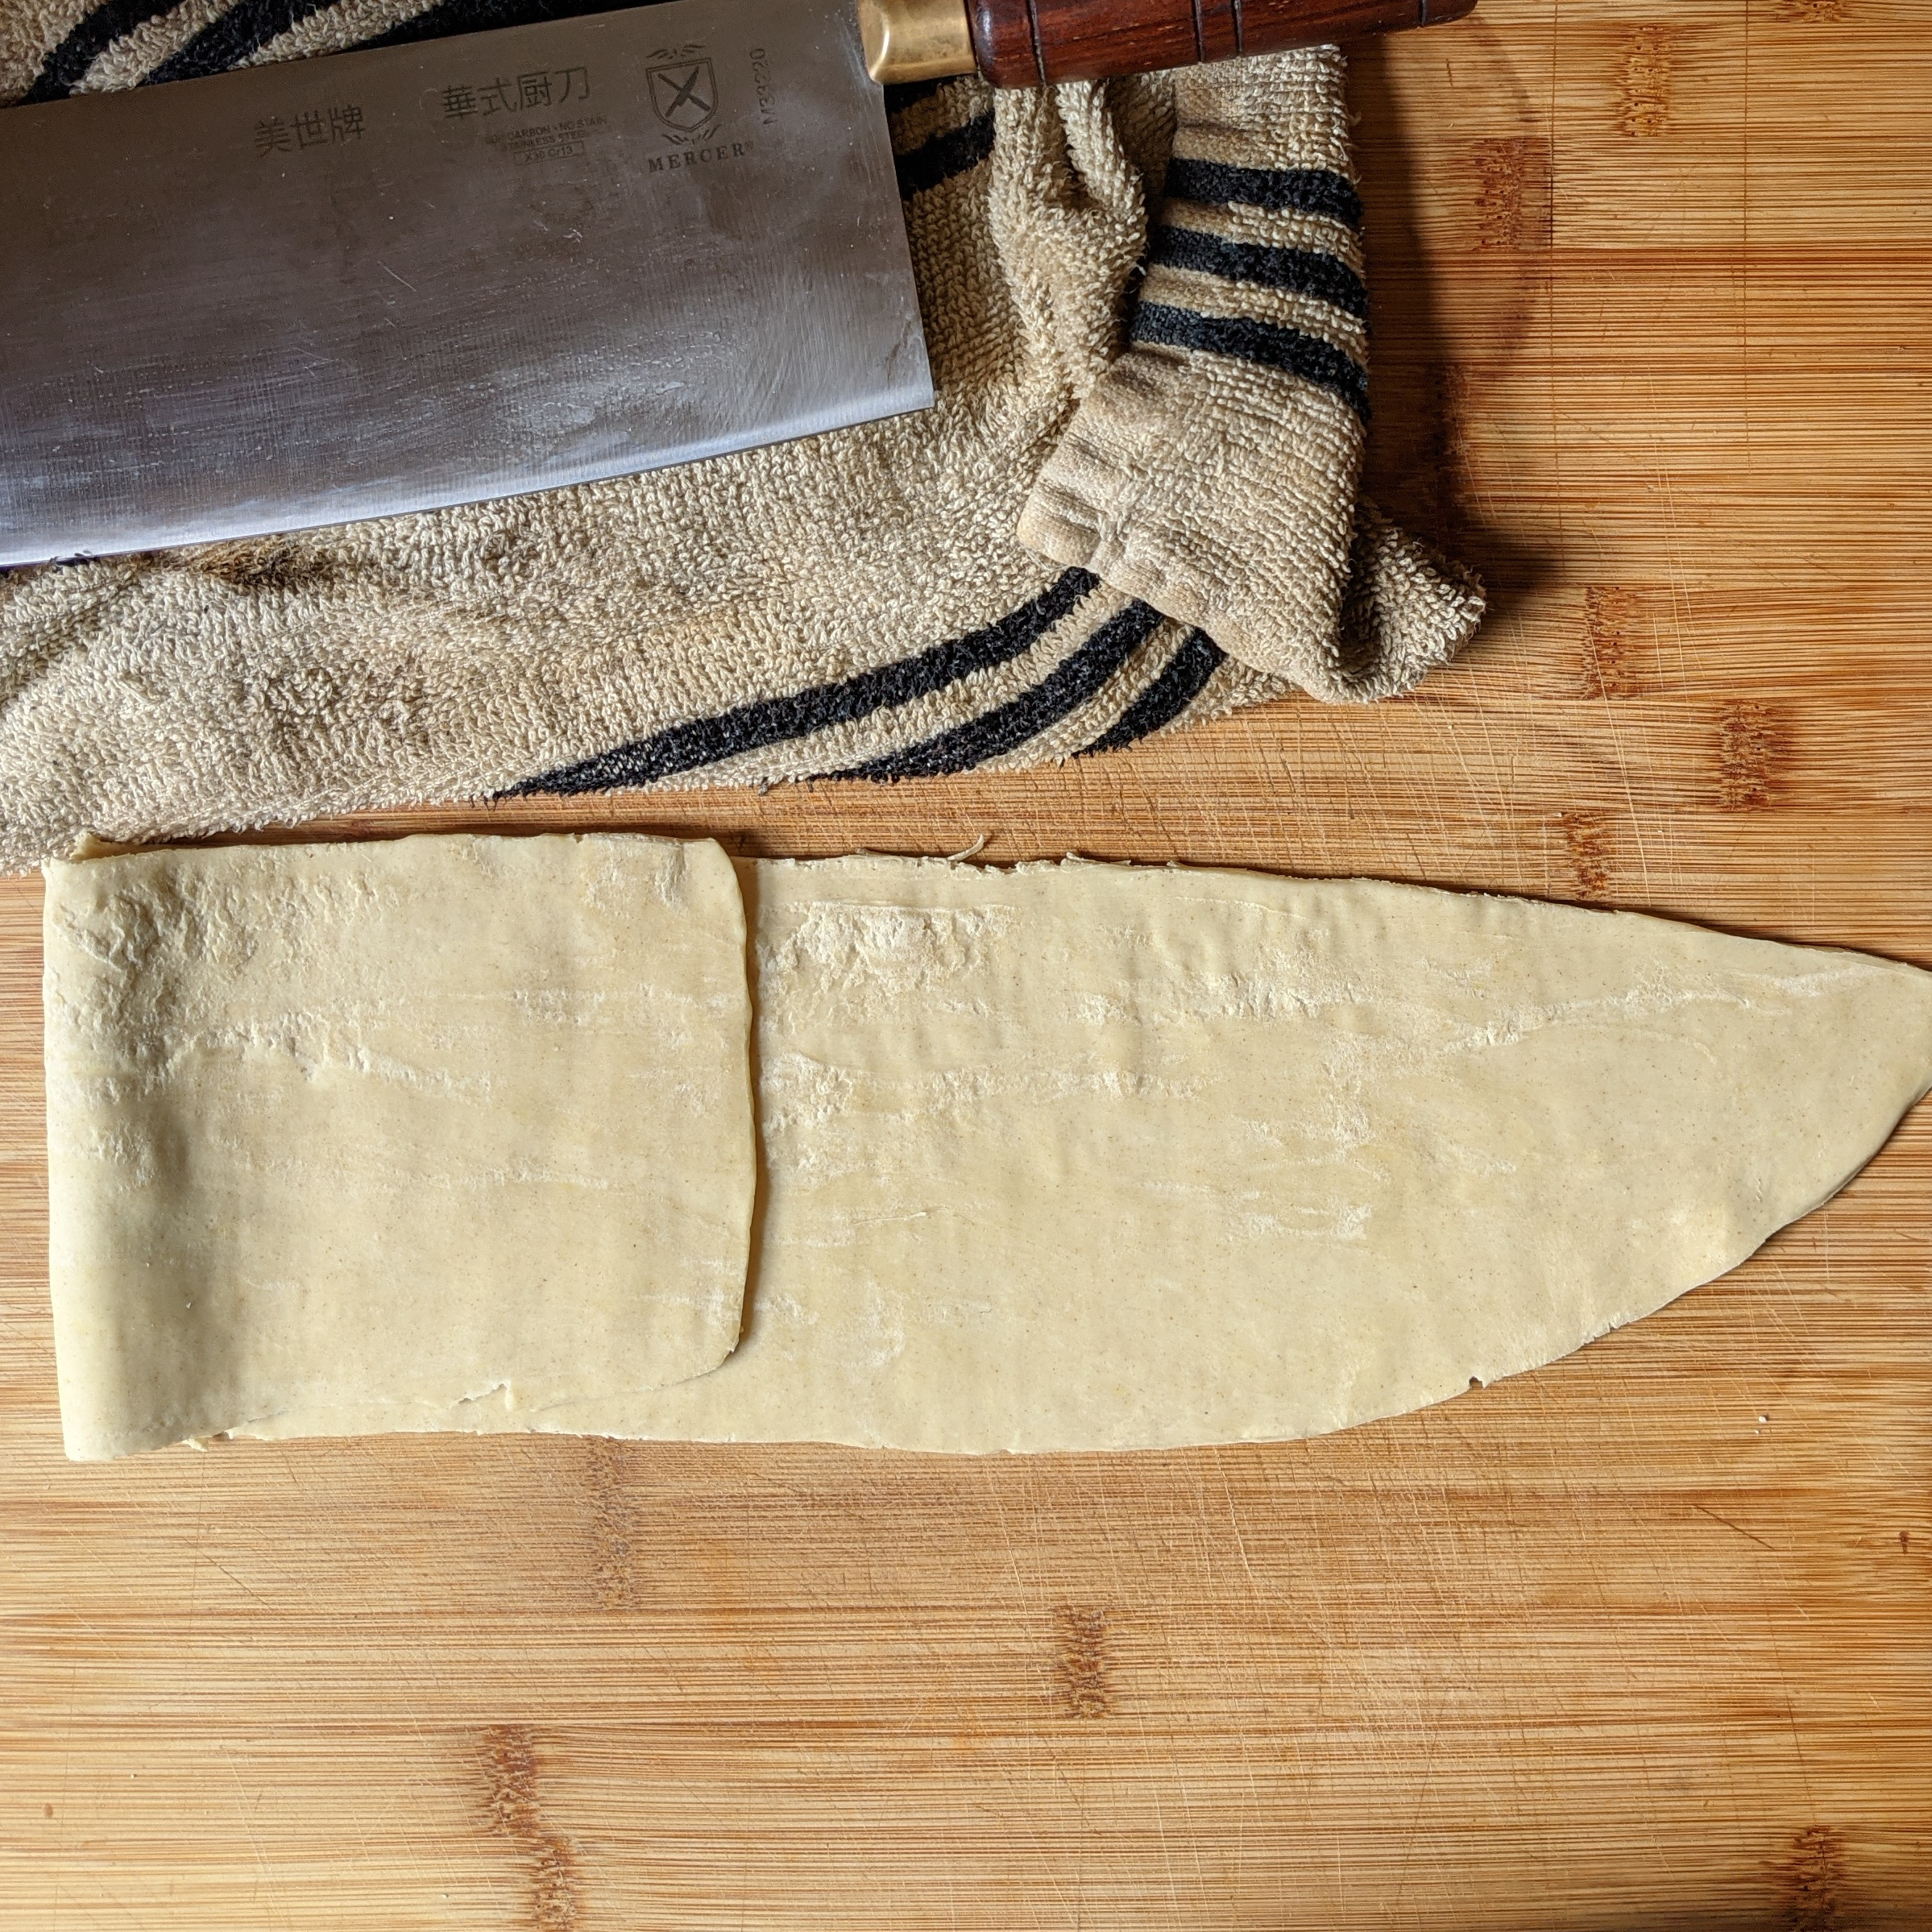 Dough is folded into one third